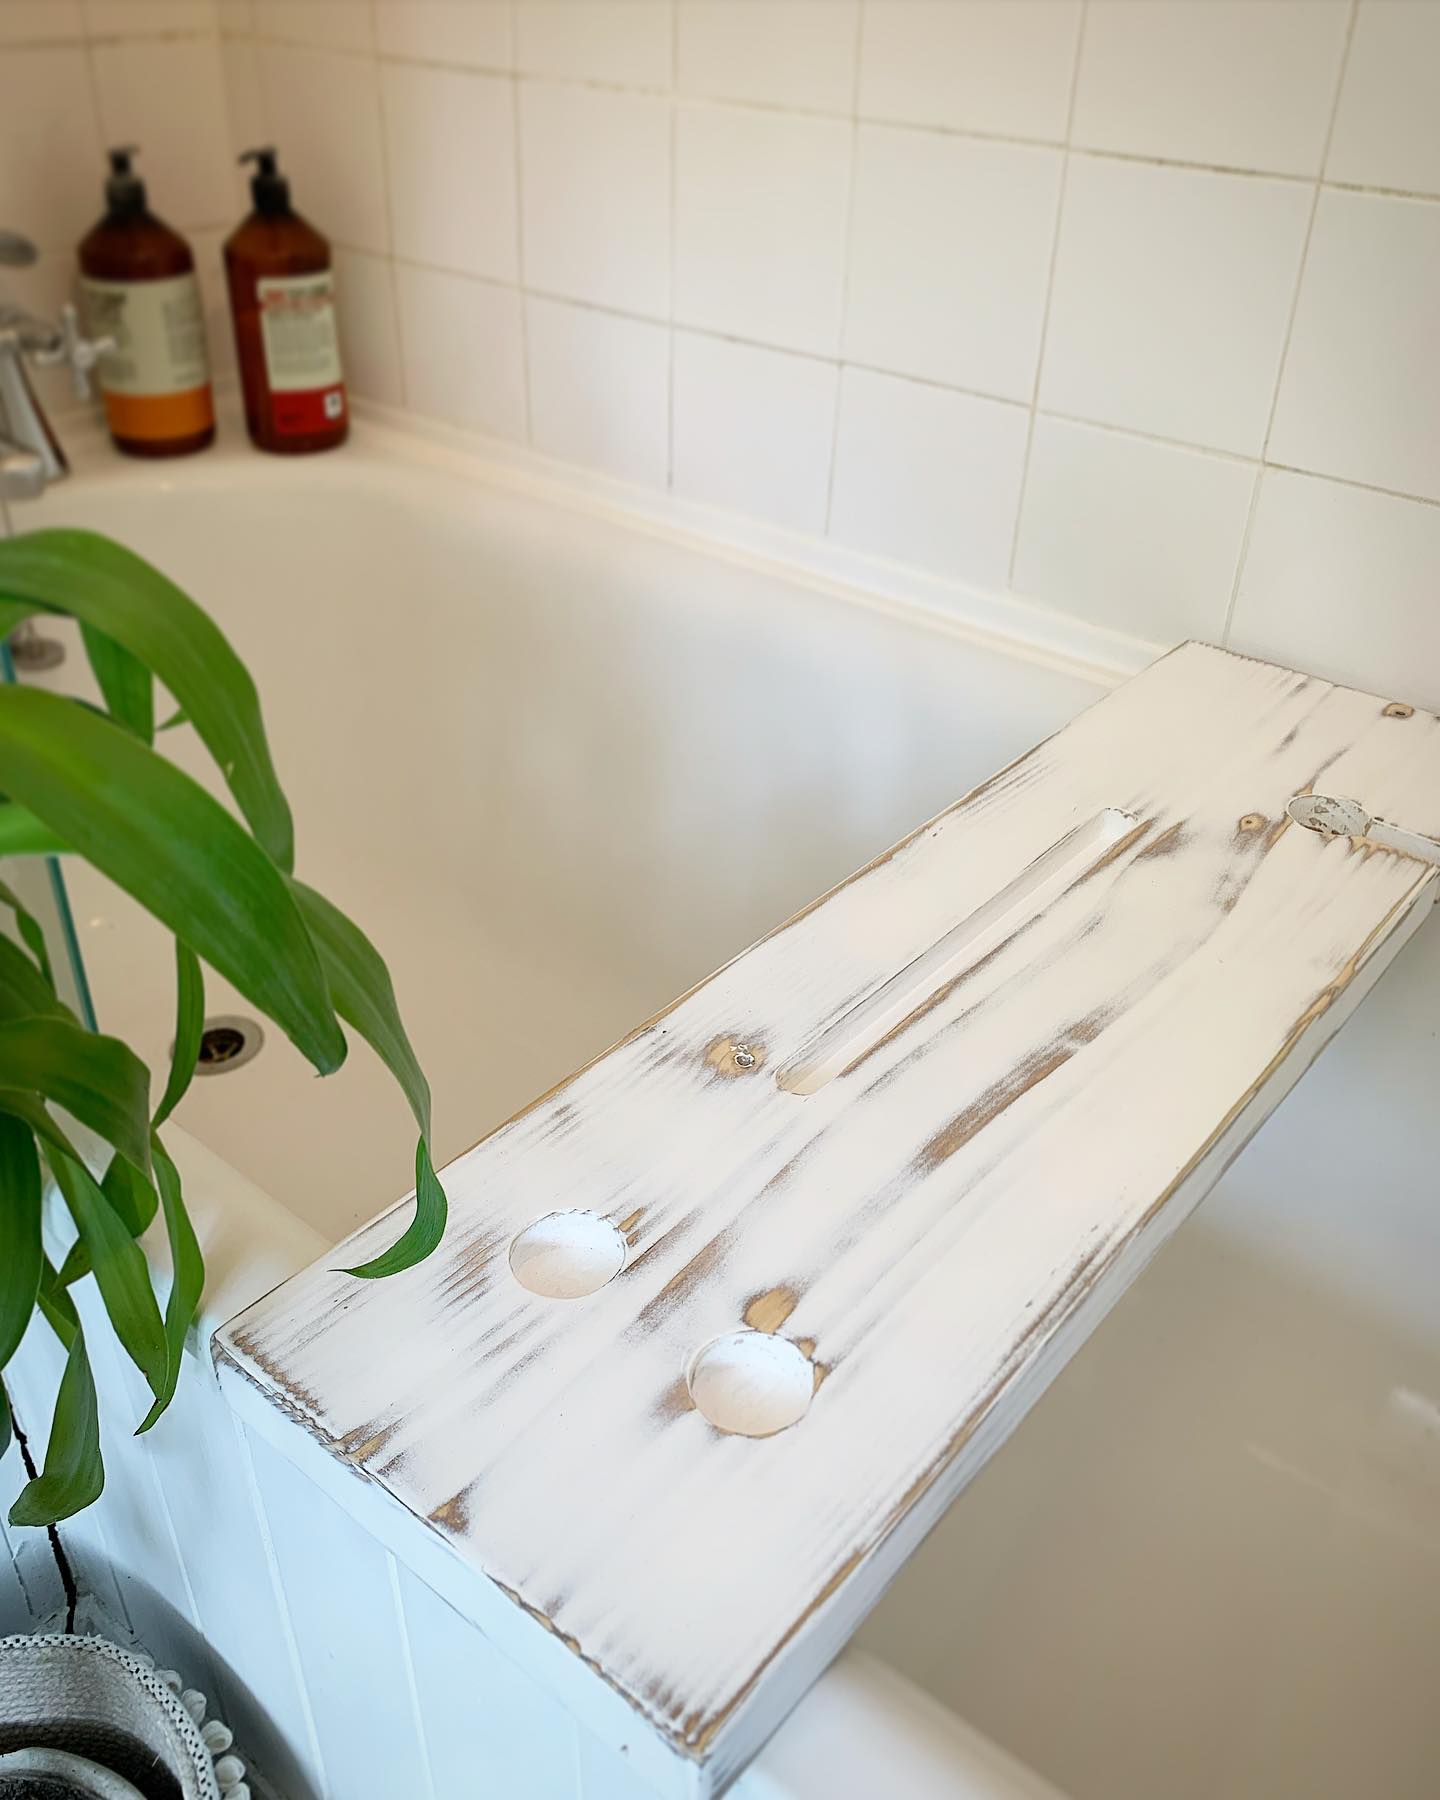 We’ve just finished another bespoke bath tray 🛁 It’s all ready for some candles, a good glass of something and an episode of one of your favourite tv shows to enjoy in the tub!...#bathtime #bubbles #homedecor #indulge #relax #aroma #atmosphere #metime #bathroomaccessories #treatyourself #madetoorder #bespoke